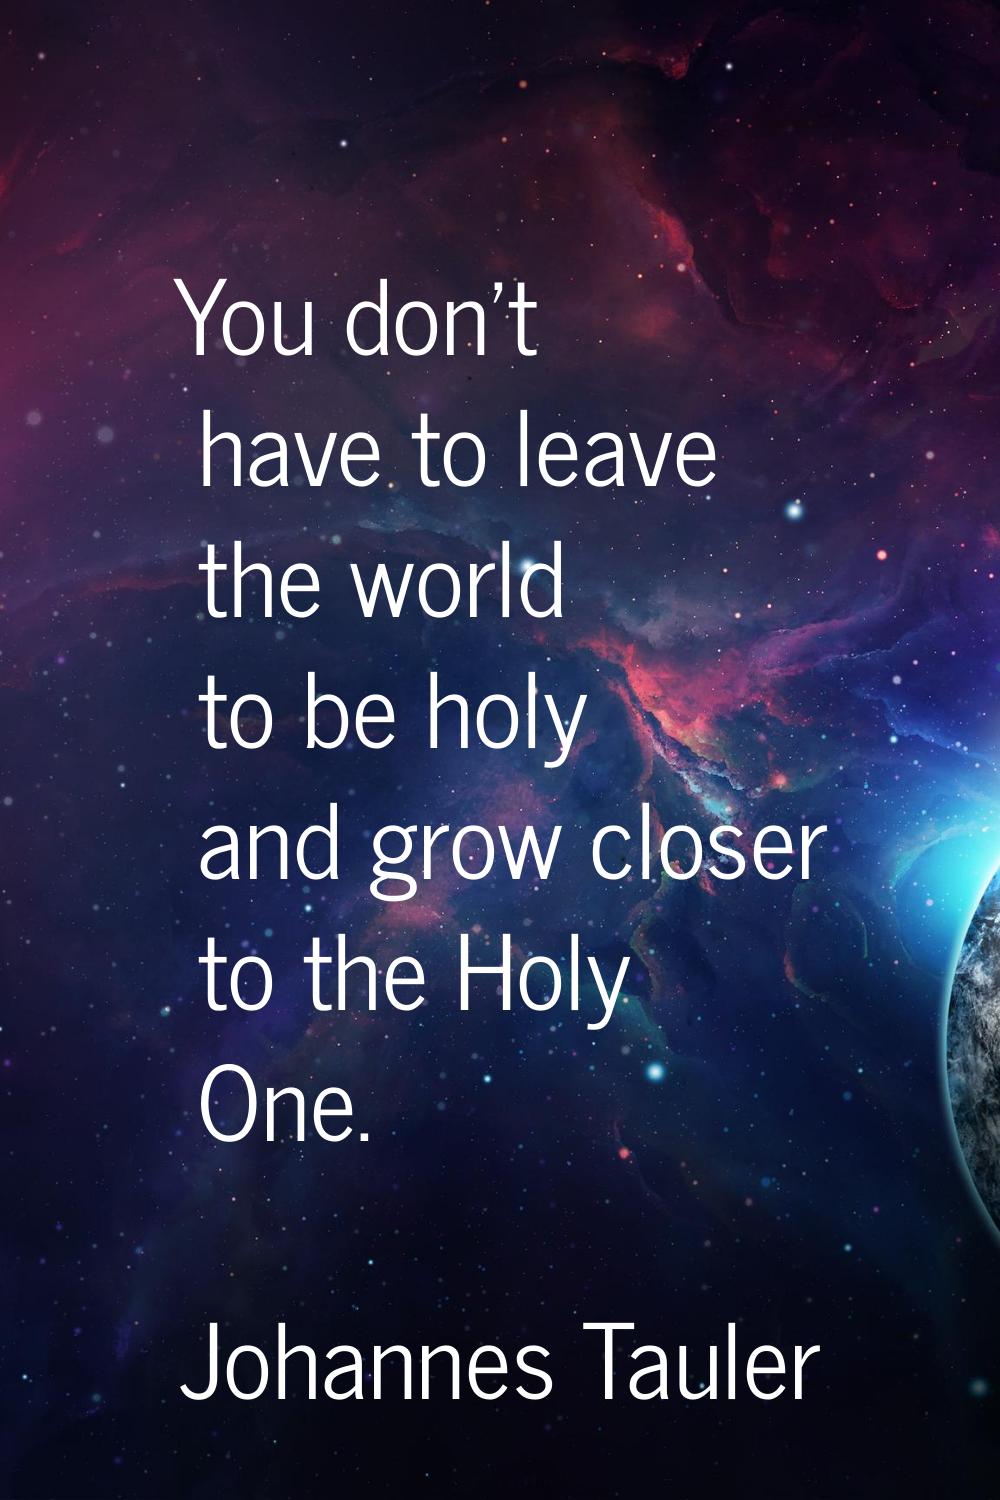 You don't have to leave the world to be holy and grow closer to the Holy One.